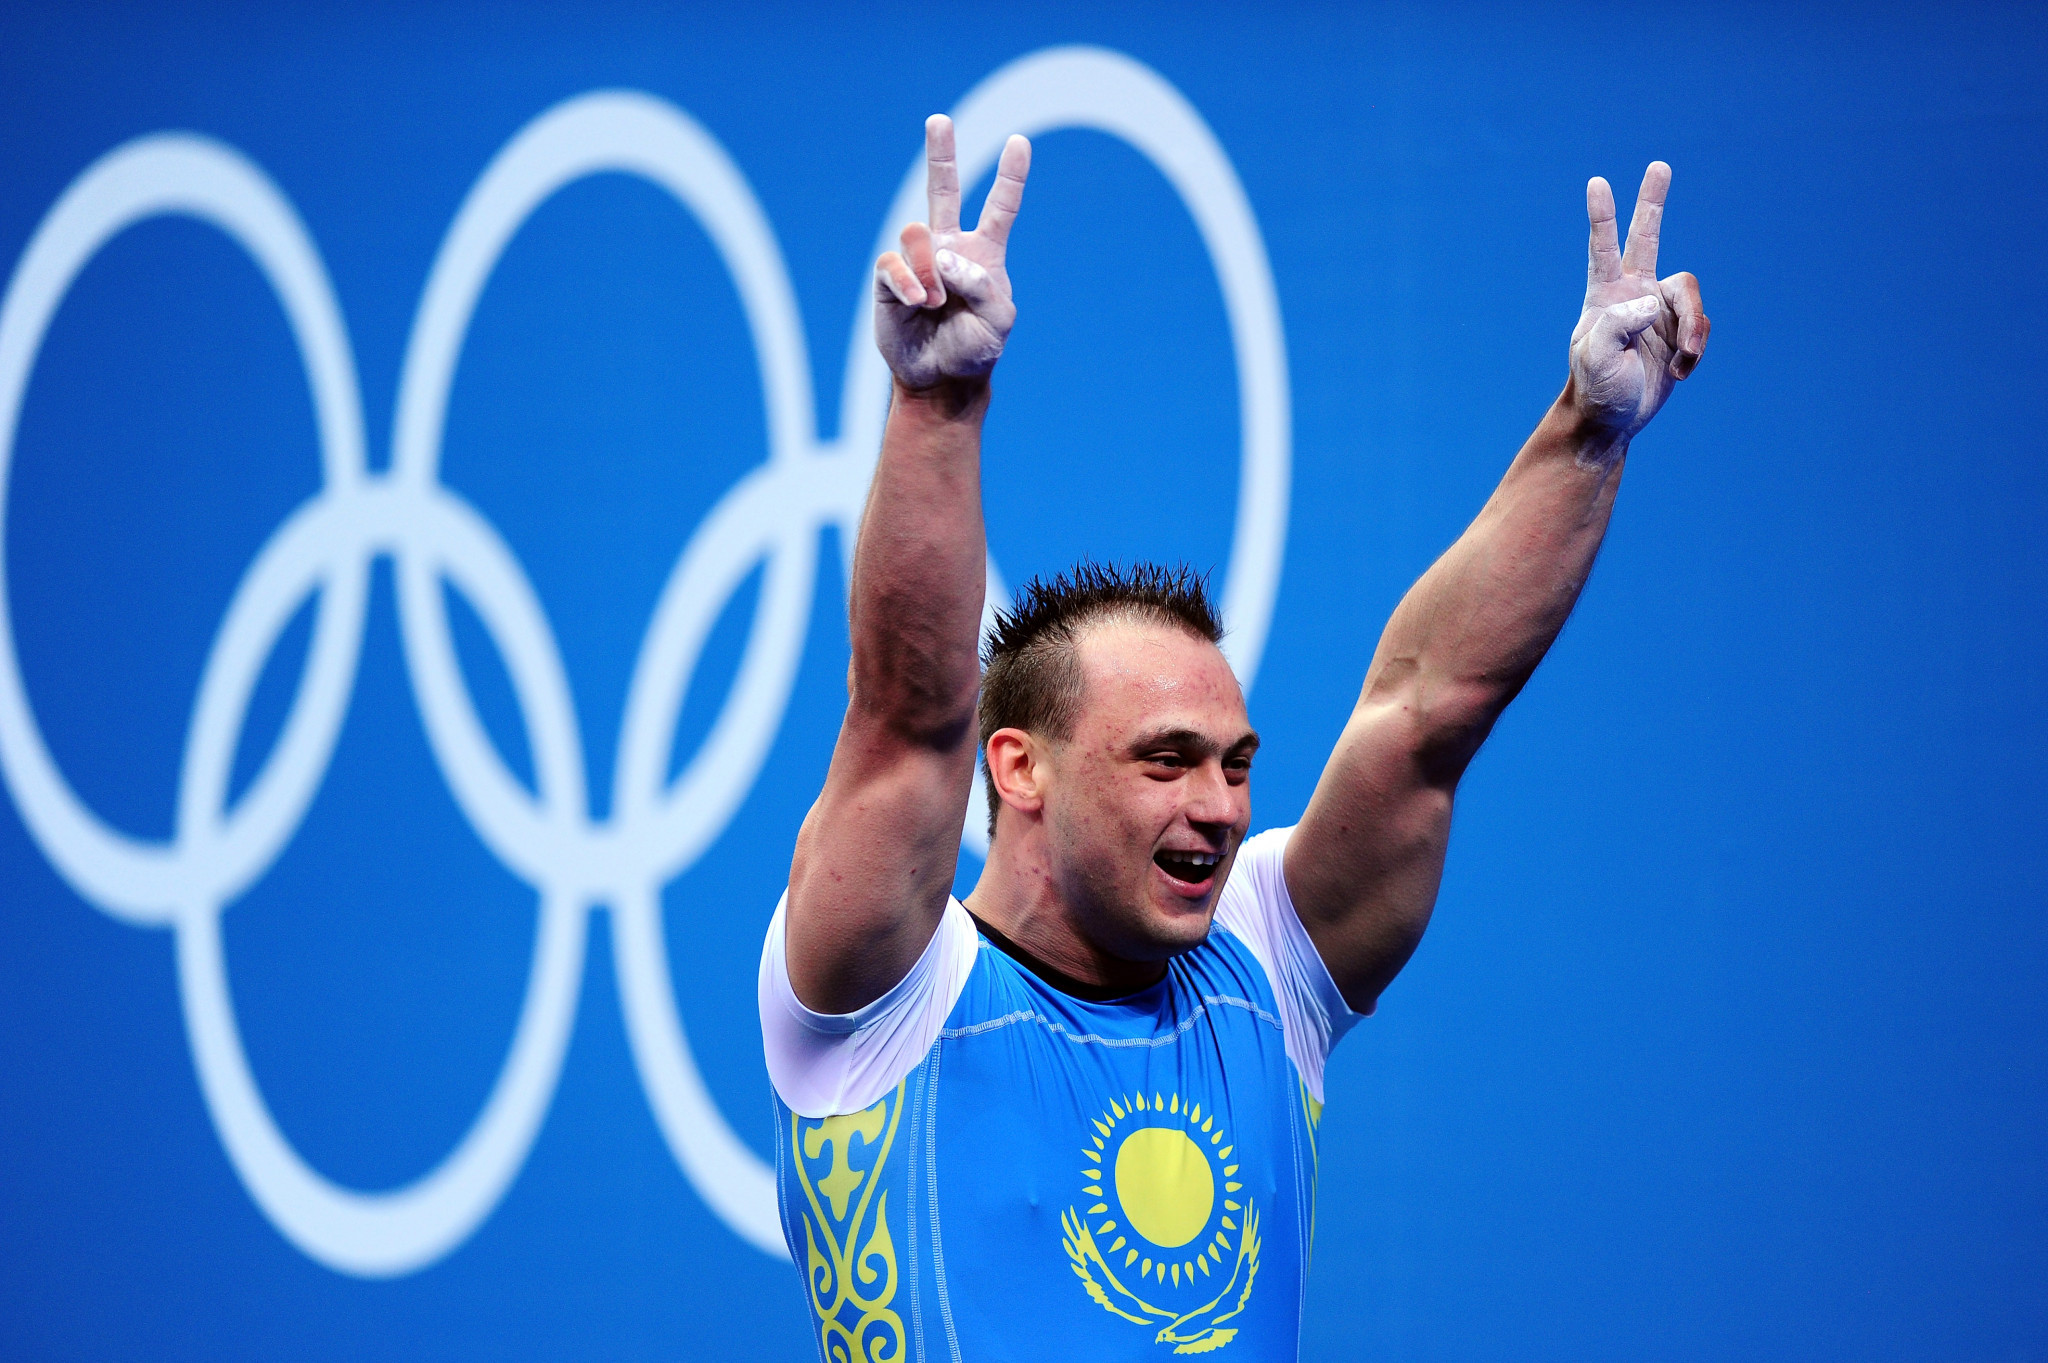 Ilya Ilyin has been involved in a number of doping controversies throughout his career ©Getty Images